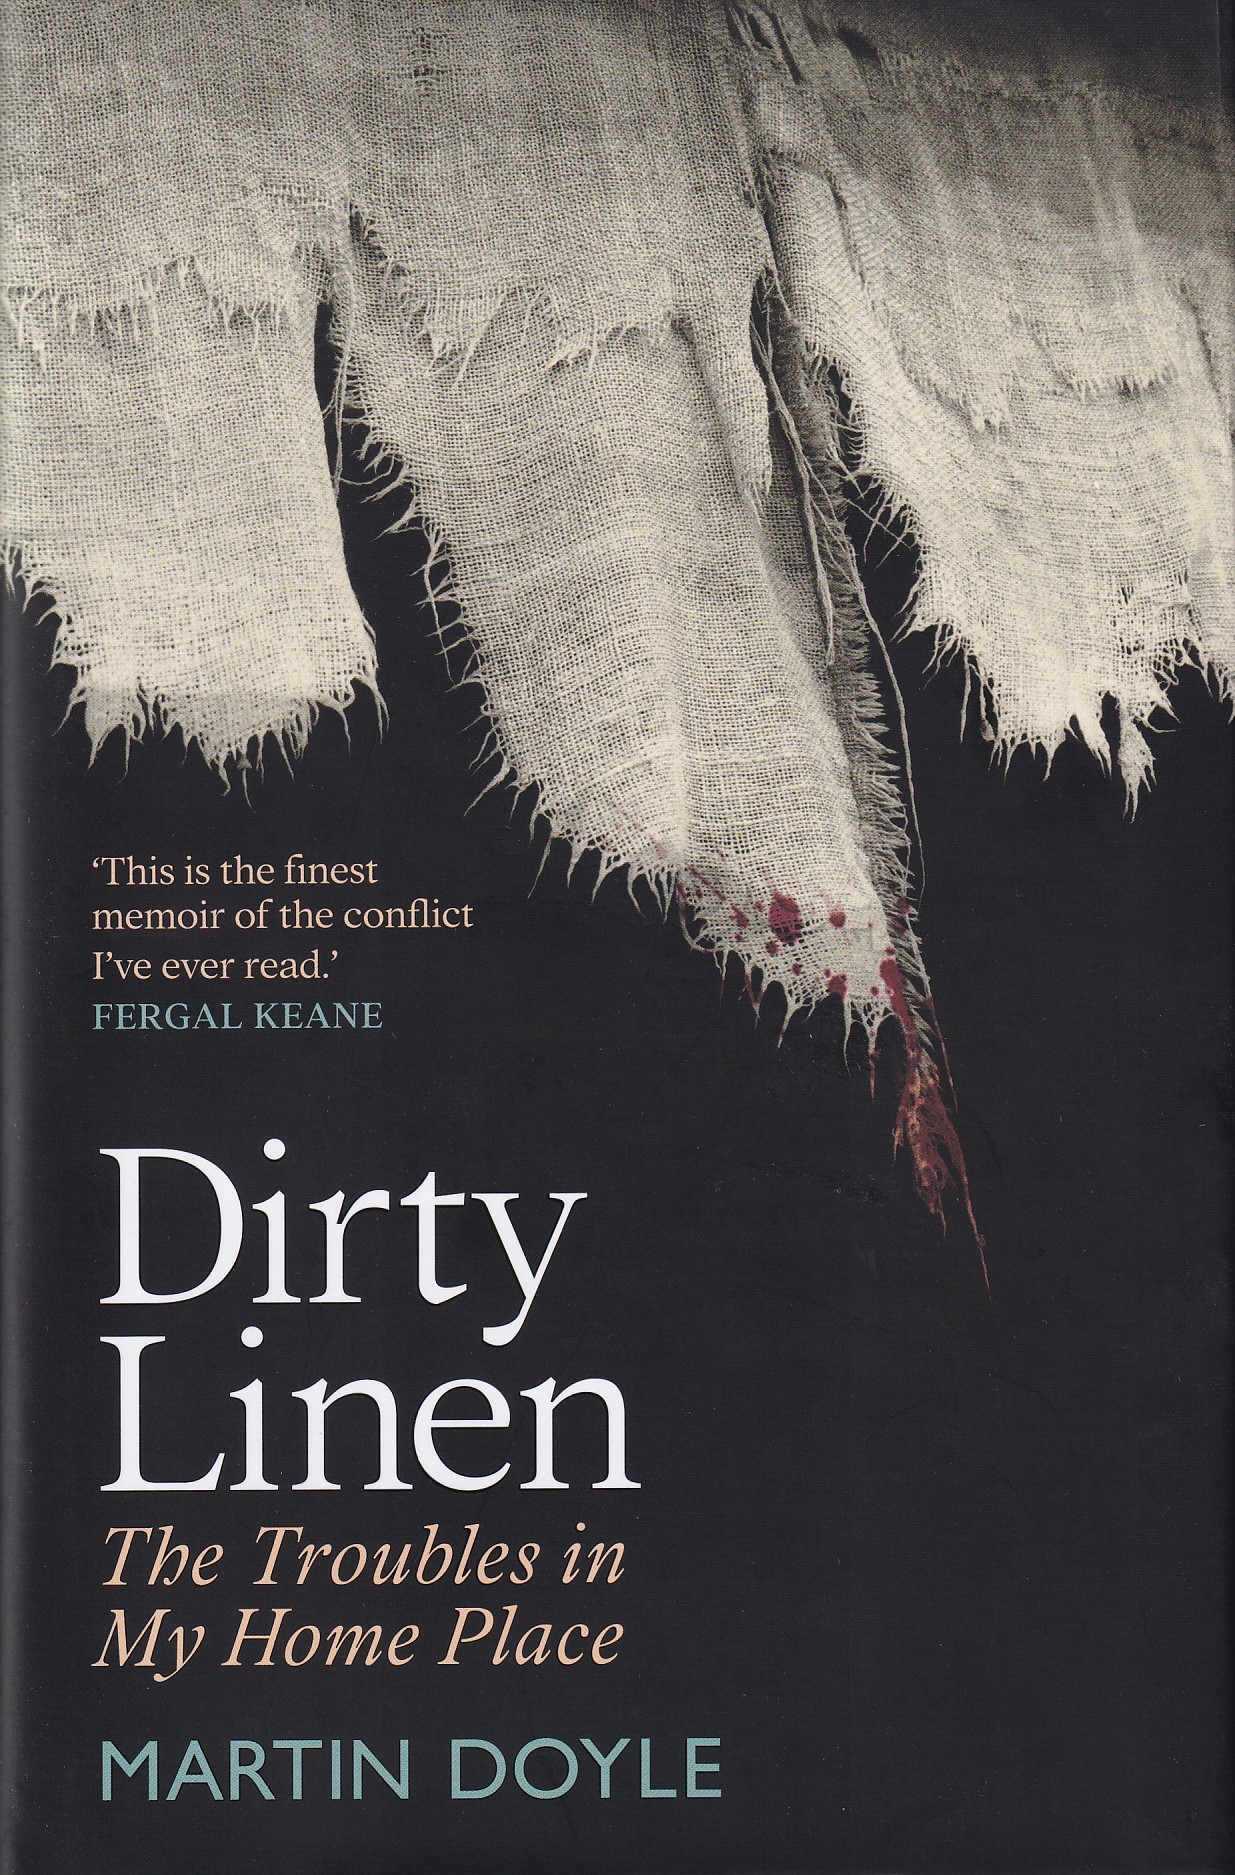 Dirty Linen: The Troubles in My Home Place [SIGNED] by Martin Doyle